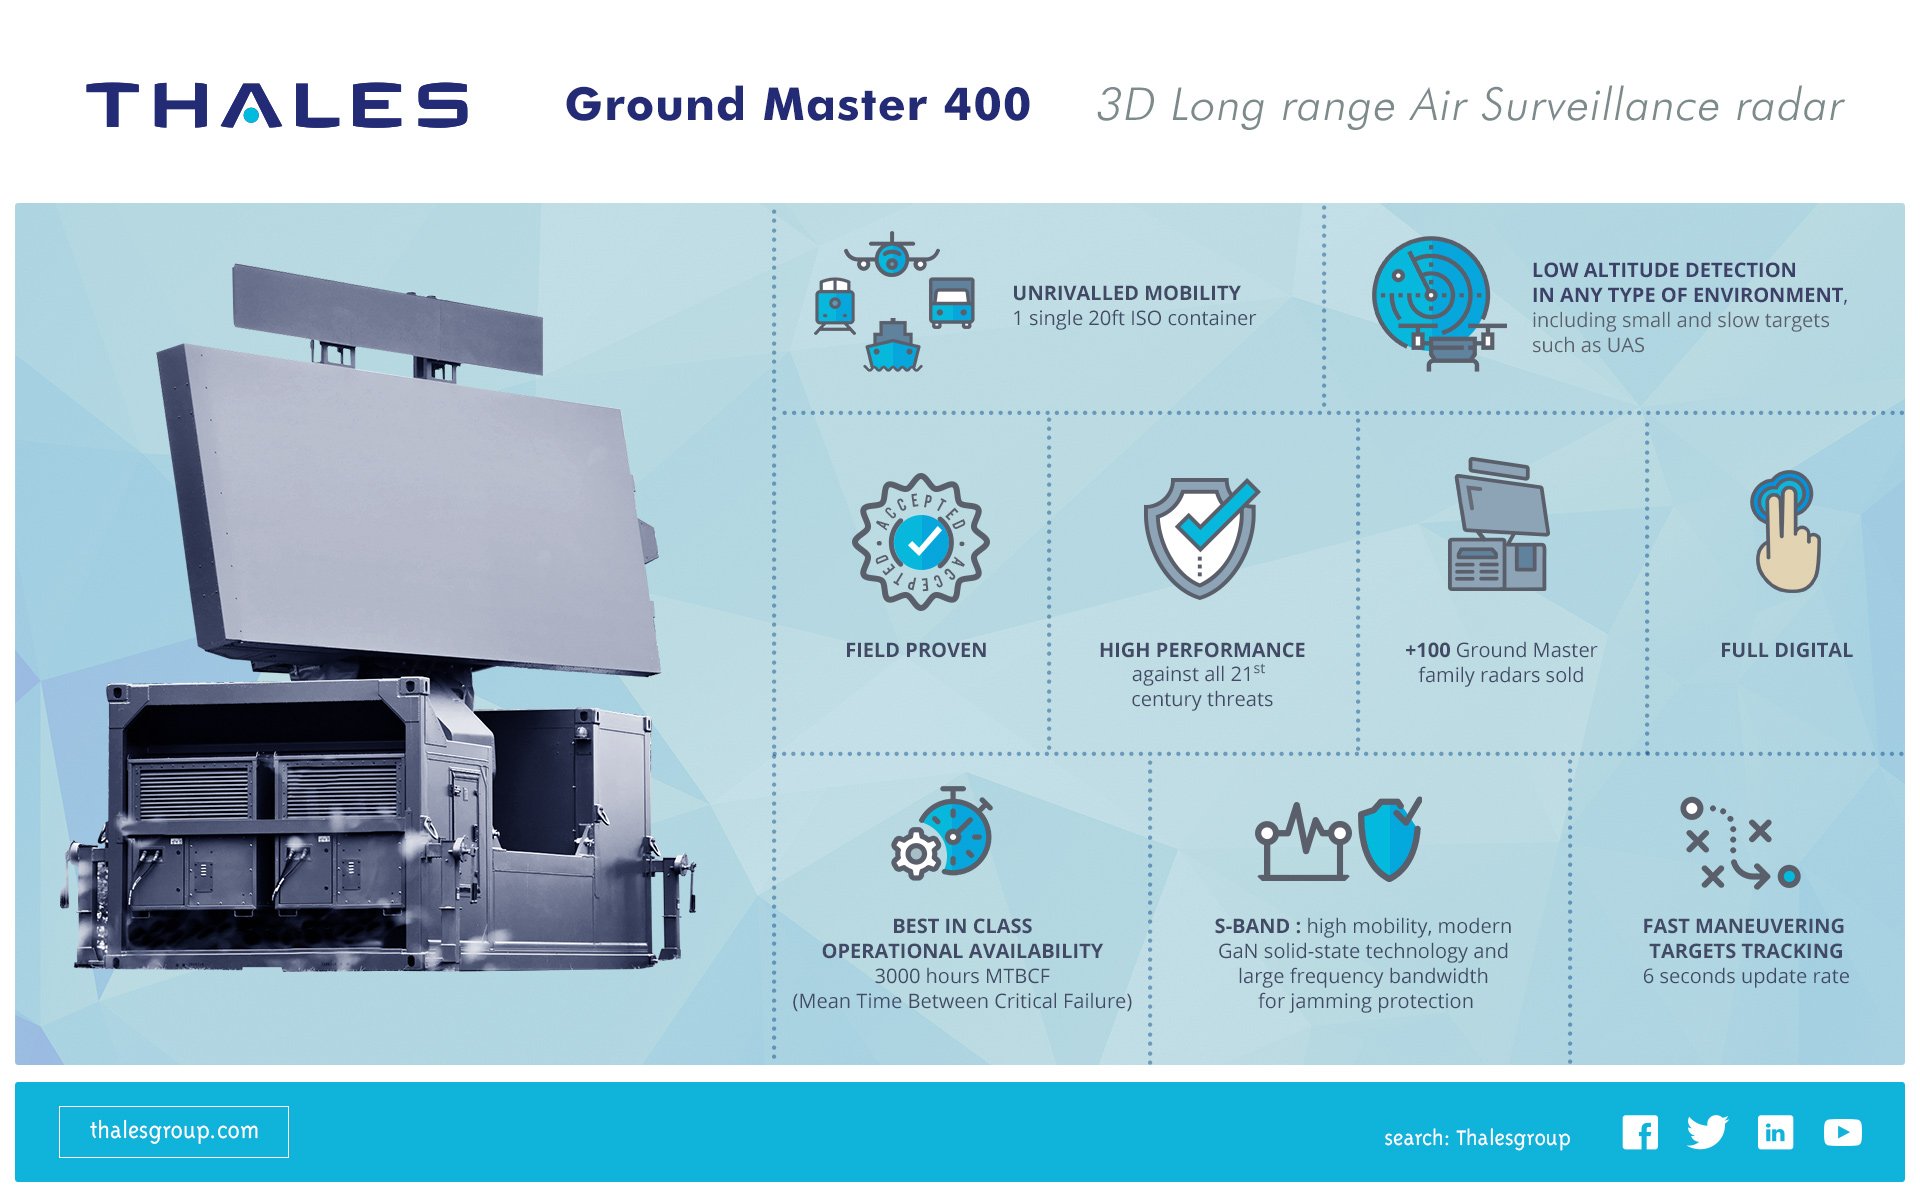 Twitter 上的Thales Defence："[#Radar] The Ground Master 400 is the only system  of its kind! 🎯 Superior detection of air threats 🎯 Availability and  mobility https://t.co/3sdJY0uoB4 https://t.co/20SJM3MYSw" / Twitter